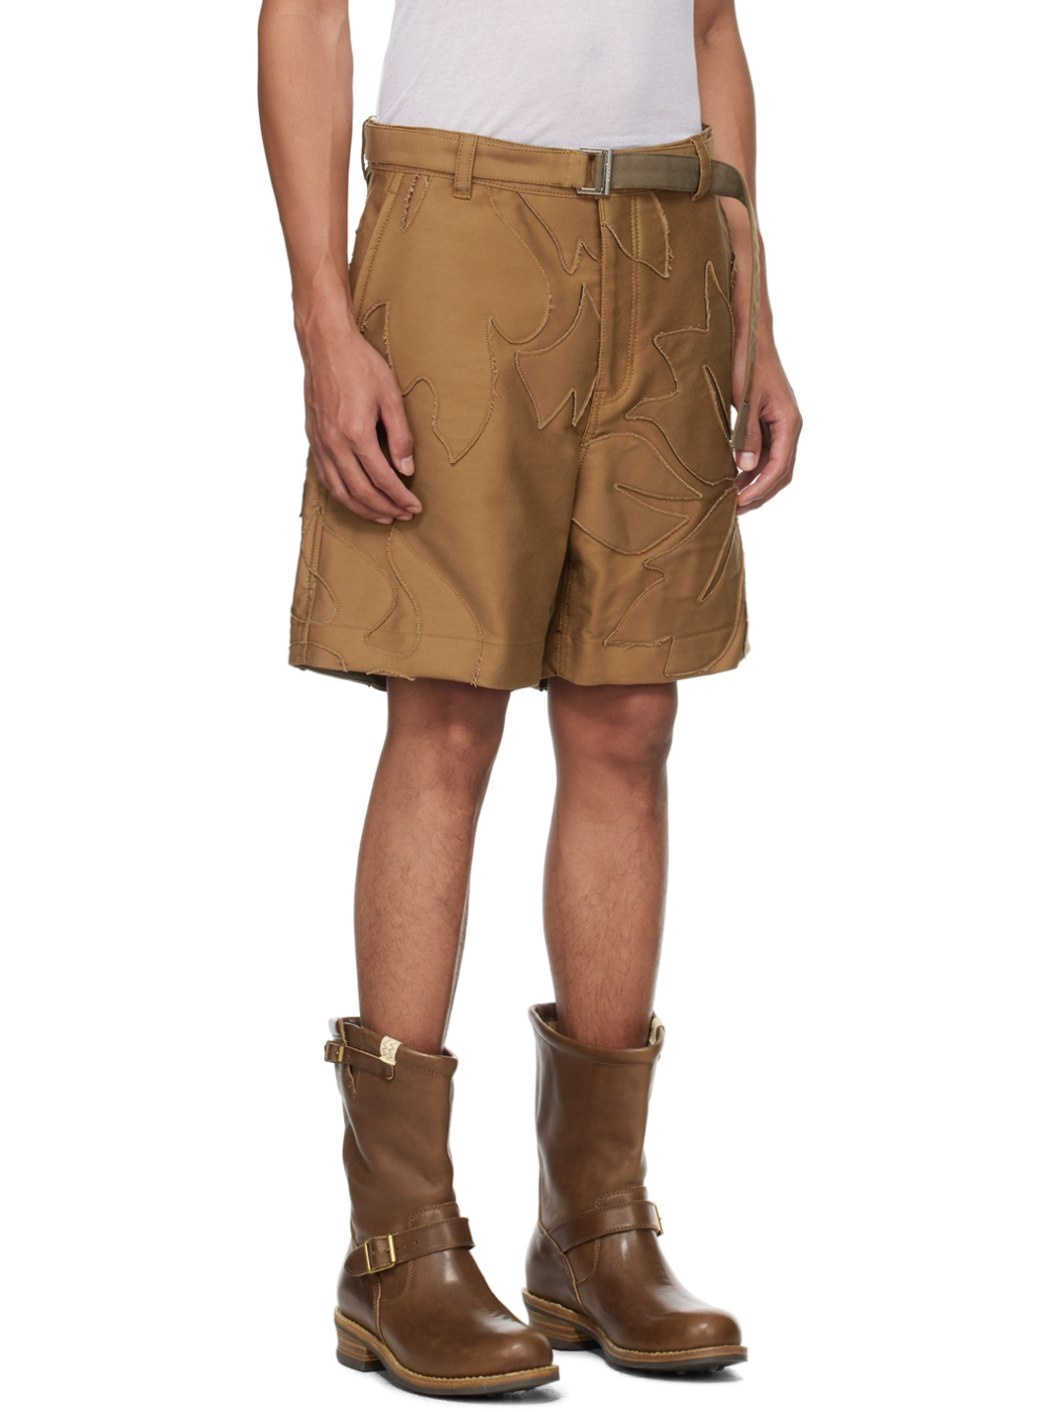 Tan Embroidered Shorts - 2